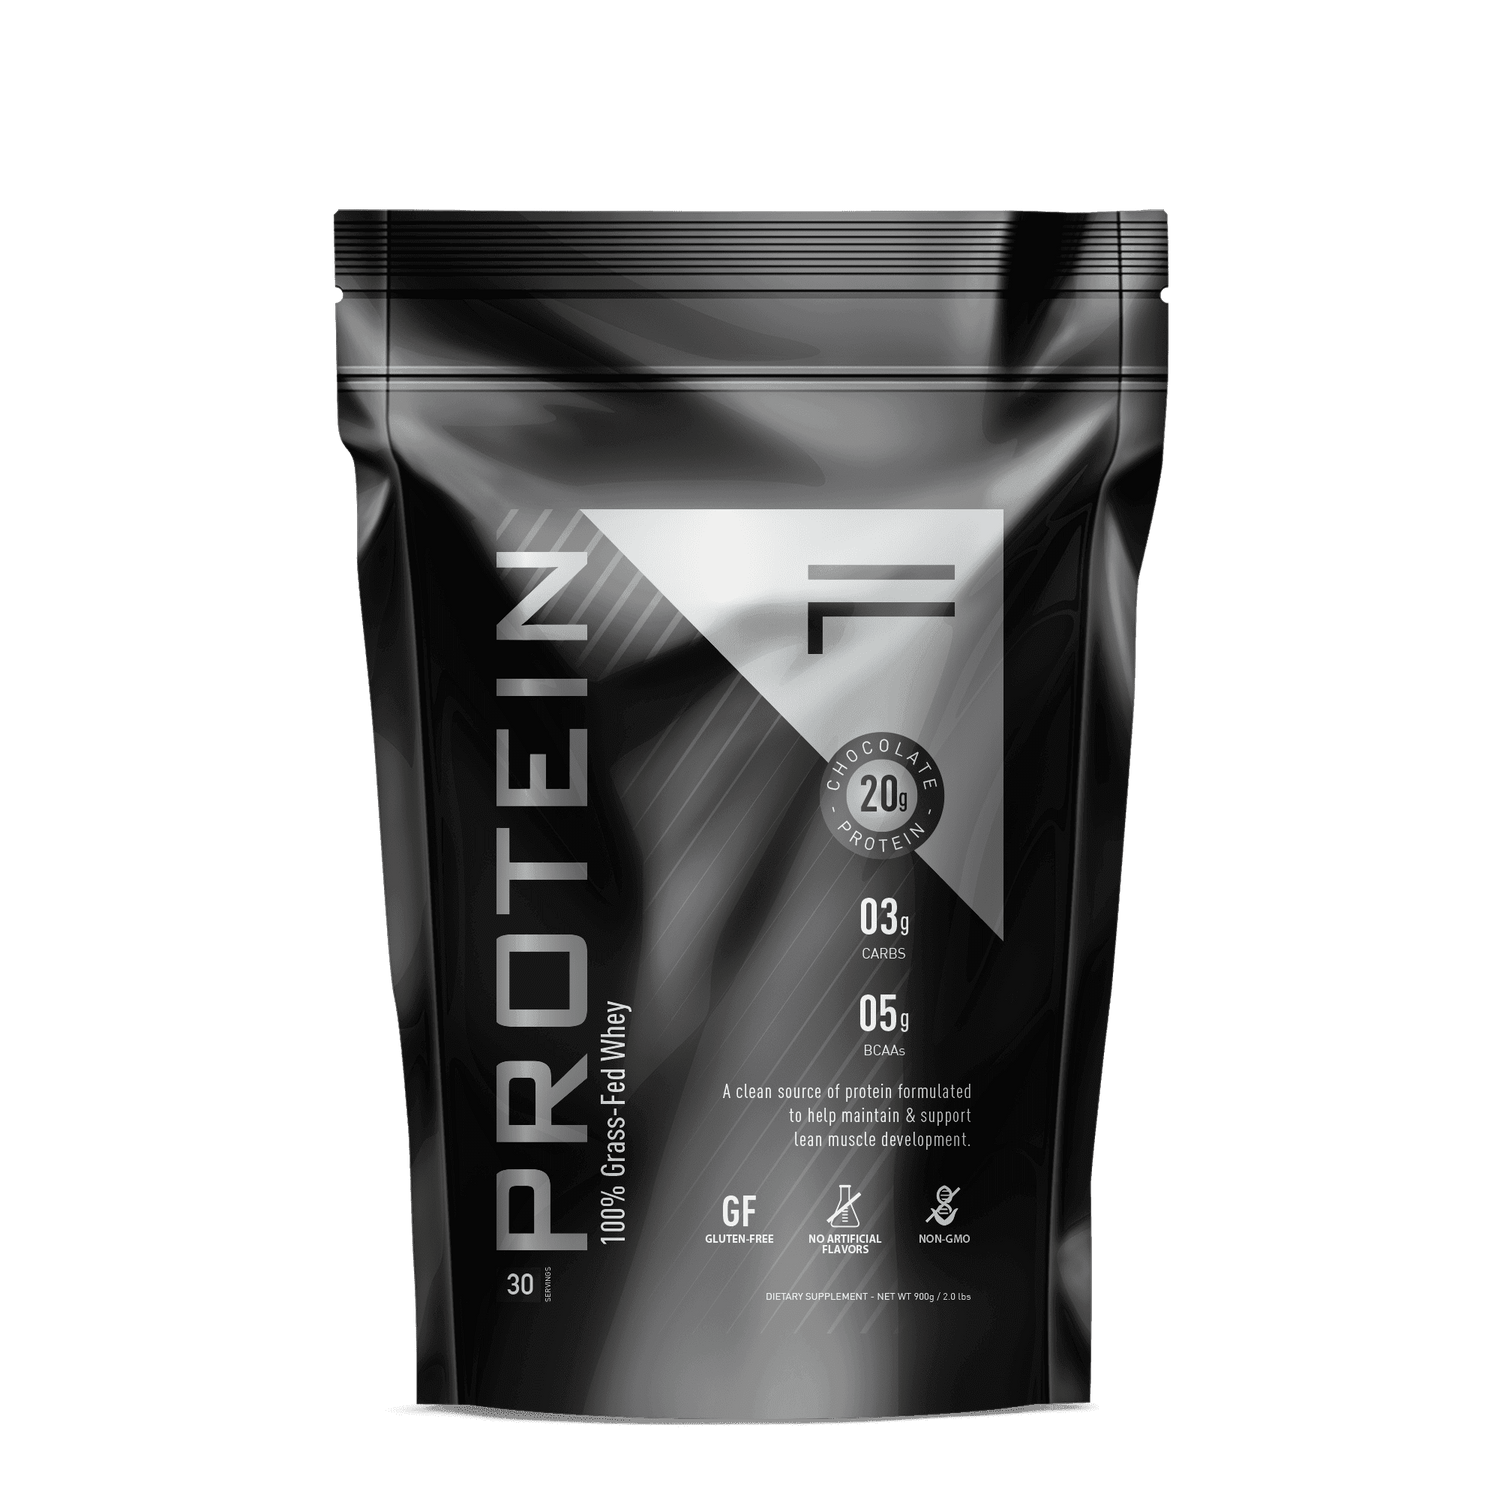 grass-fed whey protein, healthiest protein bars, healthy protein bars, naked whey, naked whey protein powder, grass fed whey protein, whey protein grass-fed, optimum nutrition, transparent labs 100% grass-fed whey protein, transparent labs grass-fed whey,